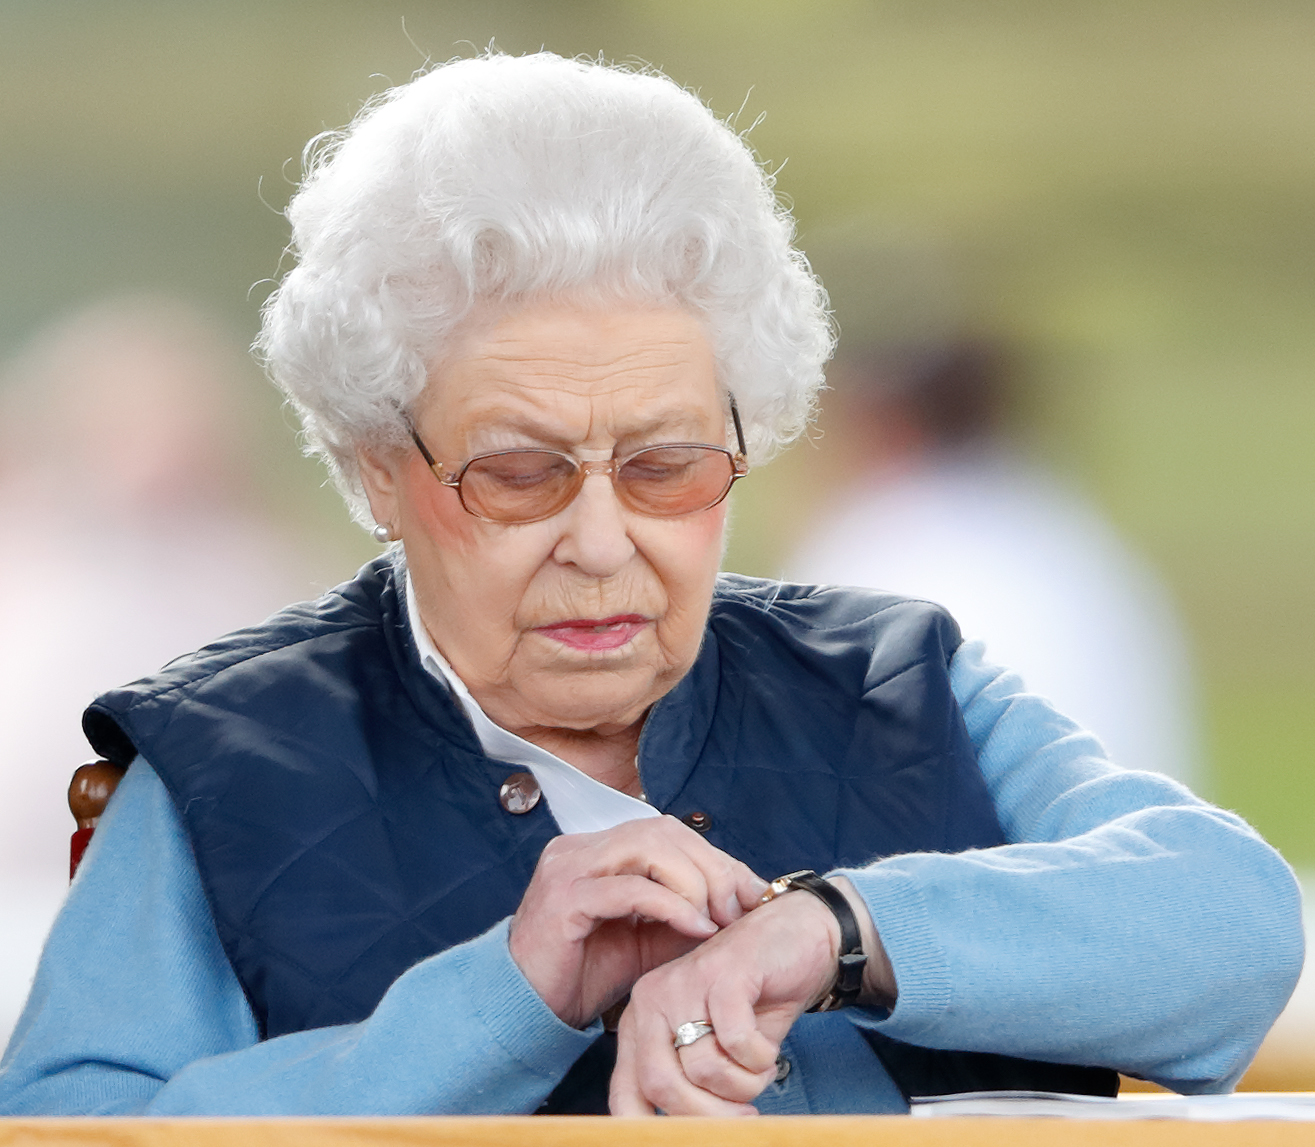 The Queen consults her wristpiece during the event. (Photo by Max Mumby/Indigo/Getty Images (Max Mumby/Indigo—Getty Images)